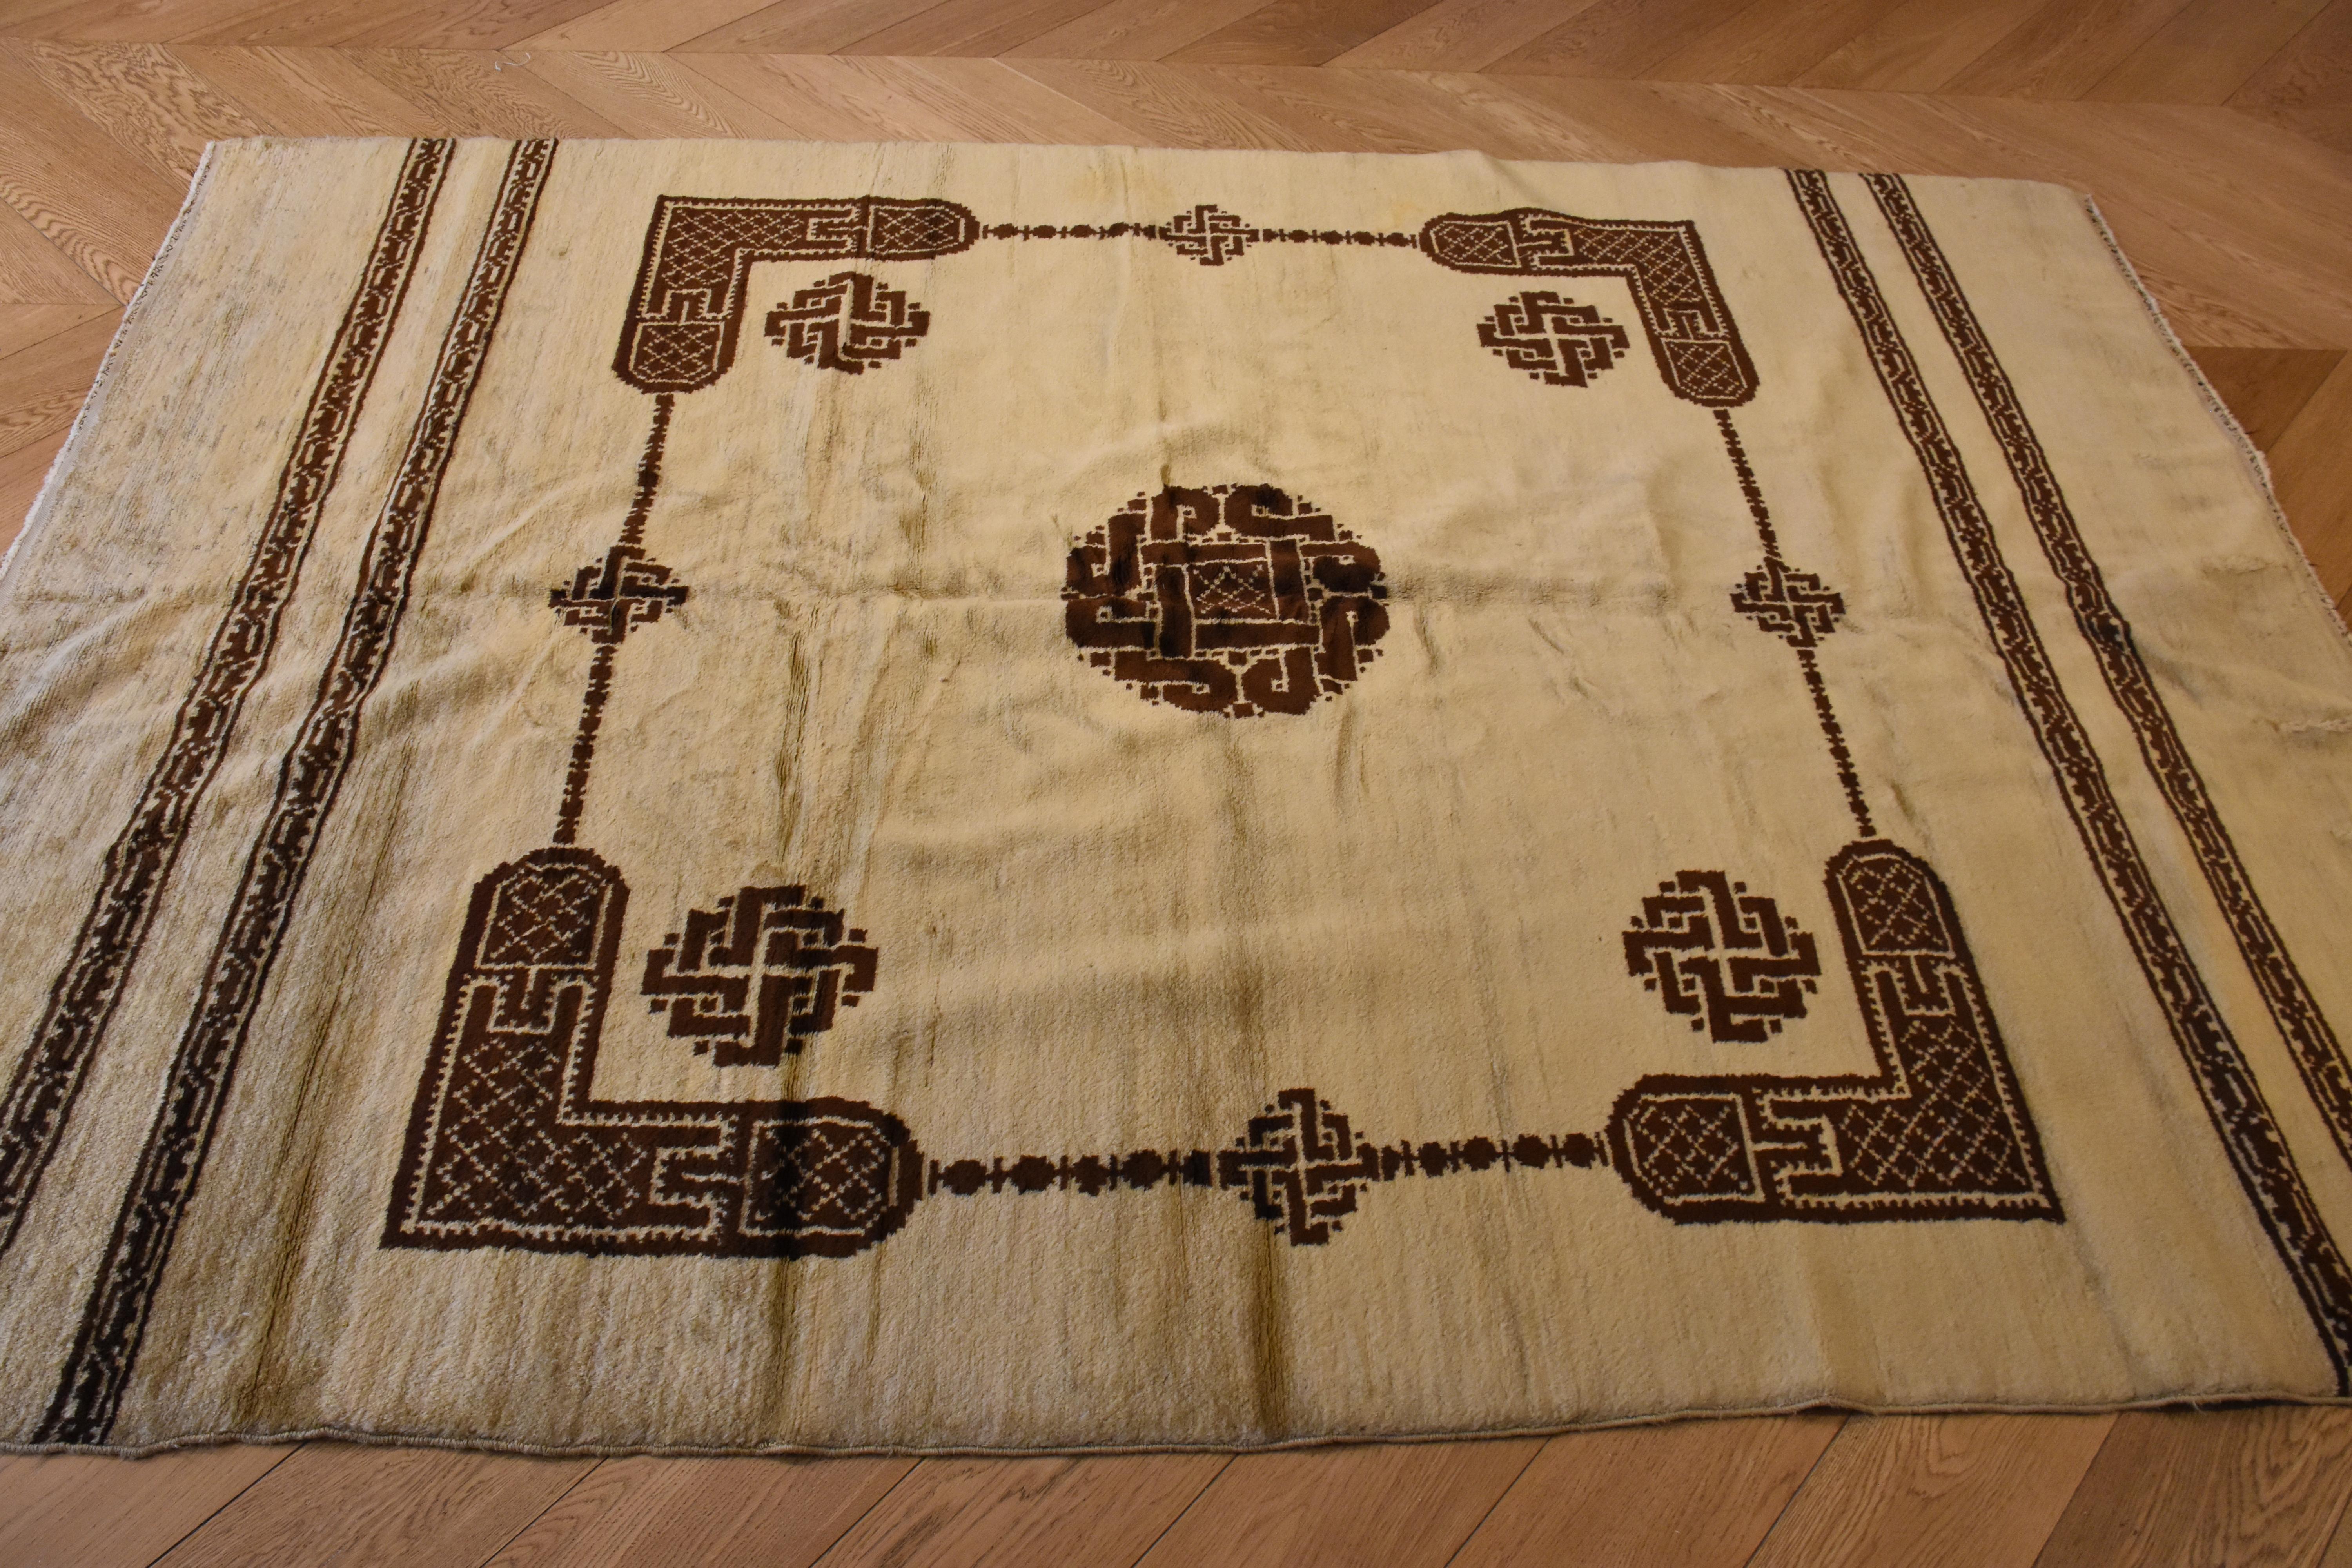 Carpet in natural knotted wool with symmetrical knot, handicraft production of North Africa.
The design of this rug reproduces a late Roman (Coptic) fabric. The drawing refers to very ancient concepts. This is the model of an ancient concept of the